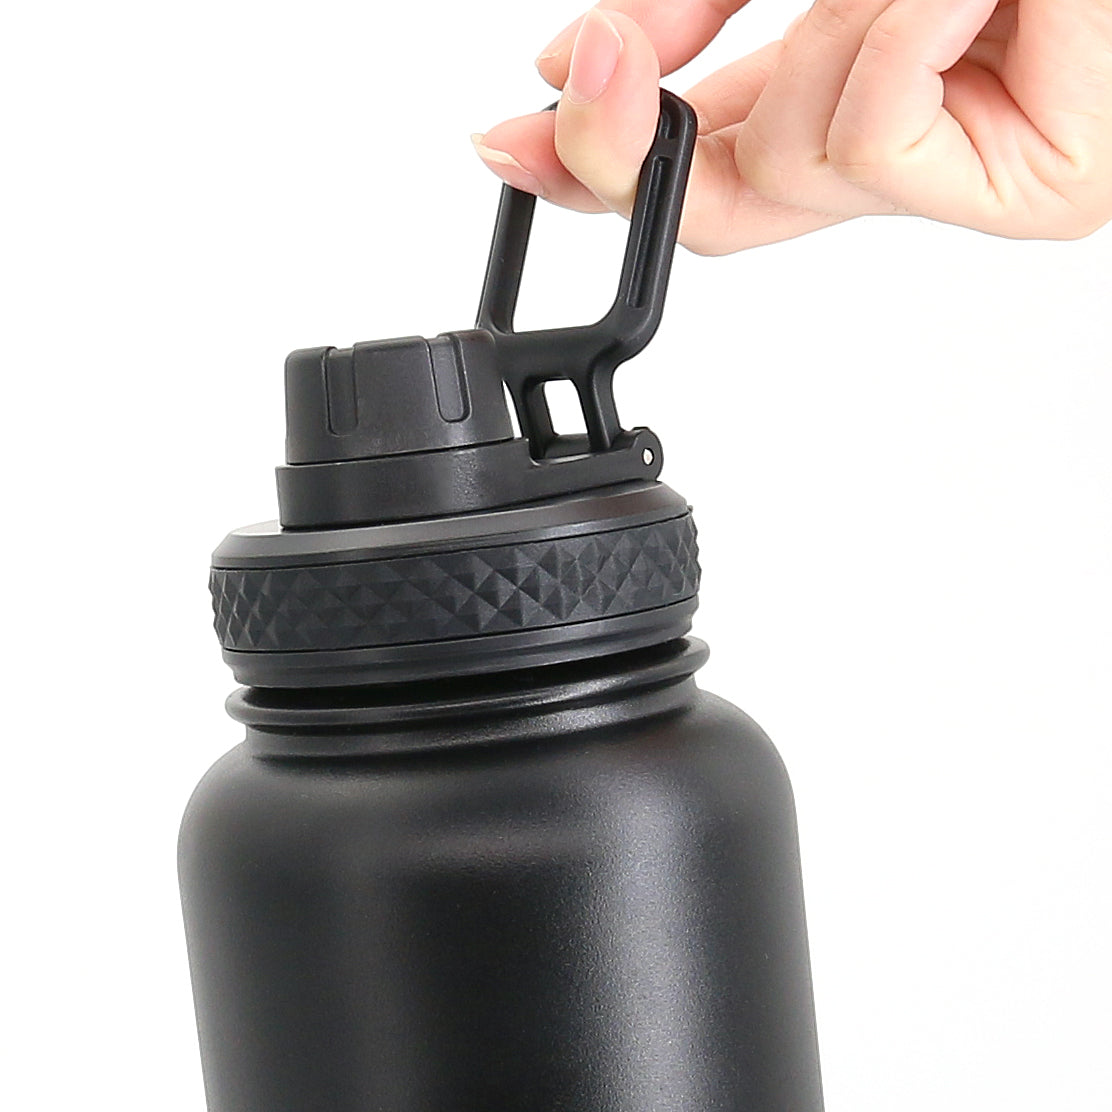 TOPOKO Straw Lid for Hydro Flask Wide Mouth Bottle, Compatible with Hydro  Flask & All Other Wide Mouth Stainless Steel Bottles